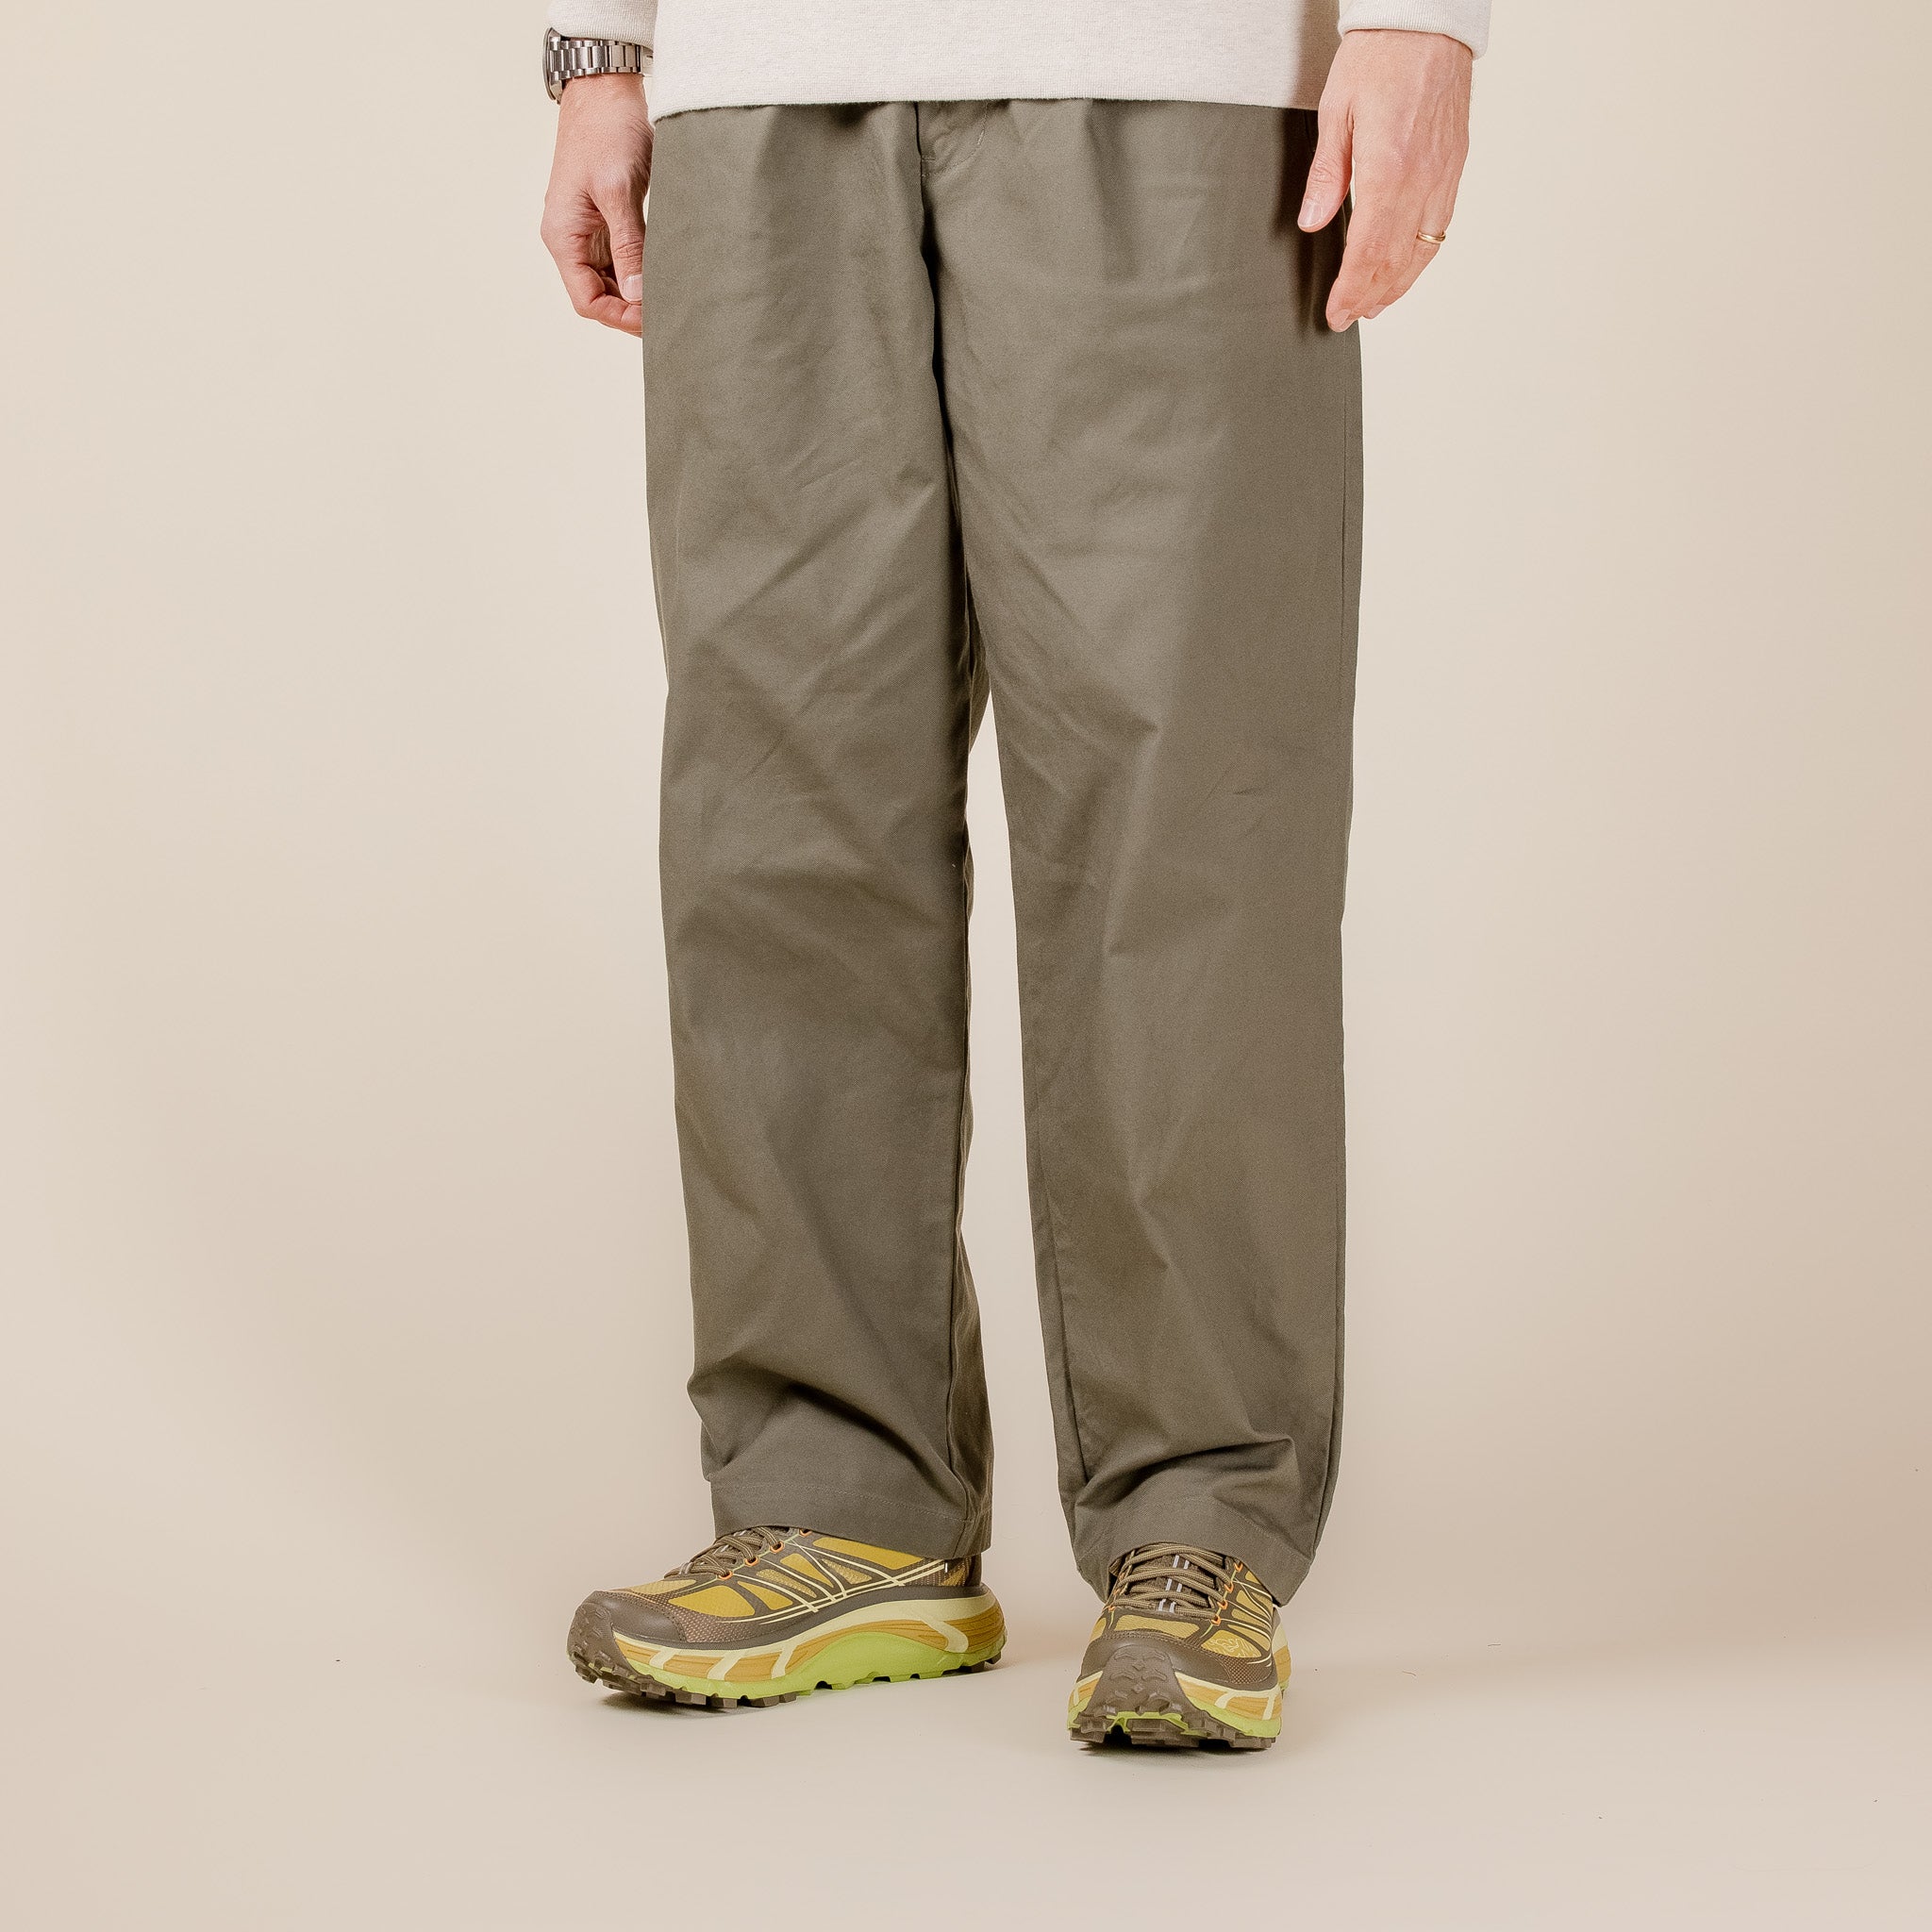 Buy Gray Side Pocket Straight Cargo Pants Cotton for Best Price, Reviews,  Free Shipping